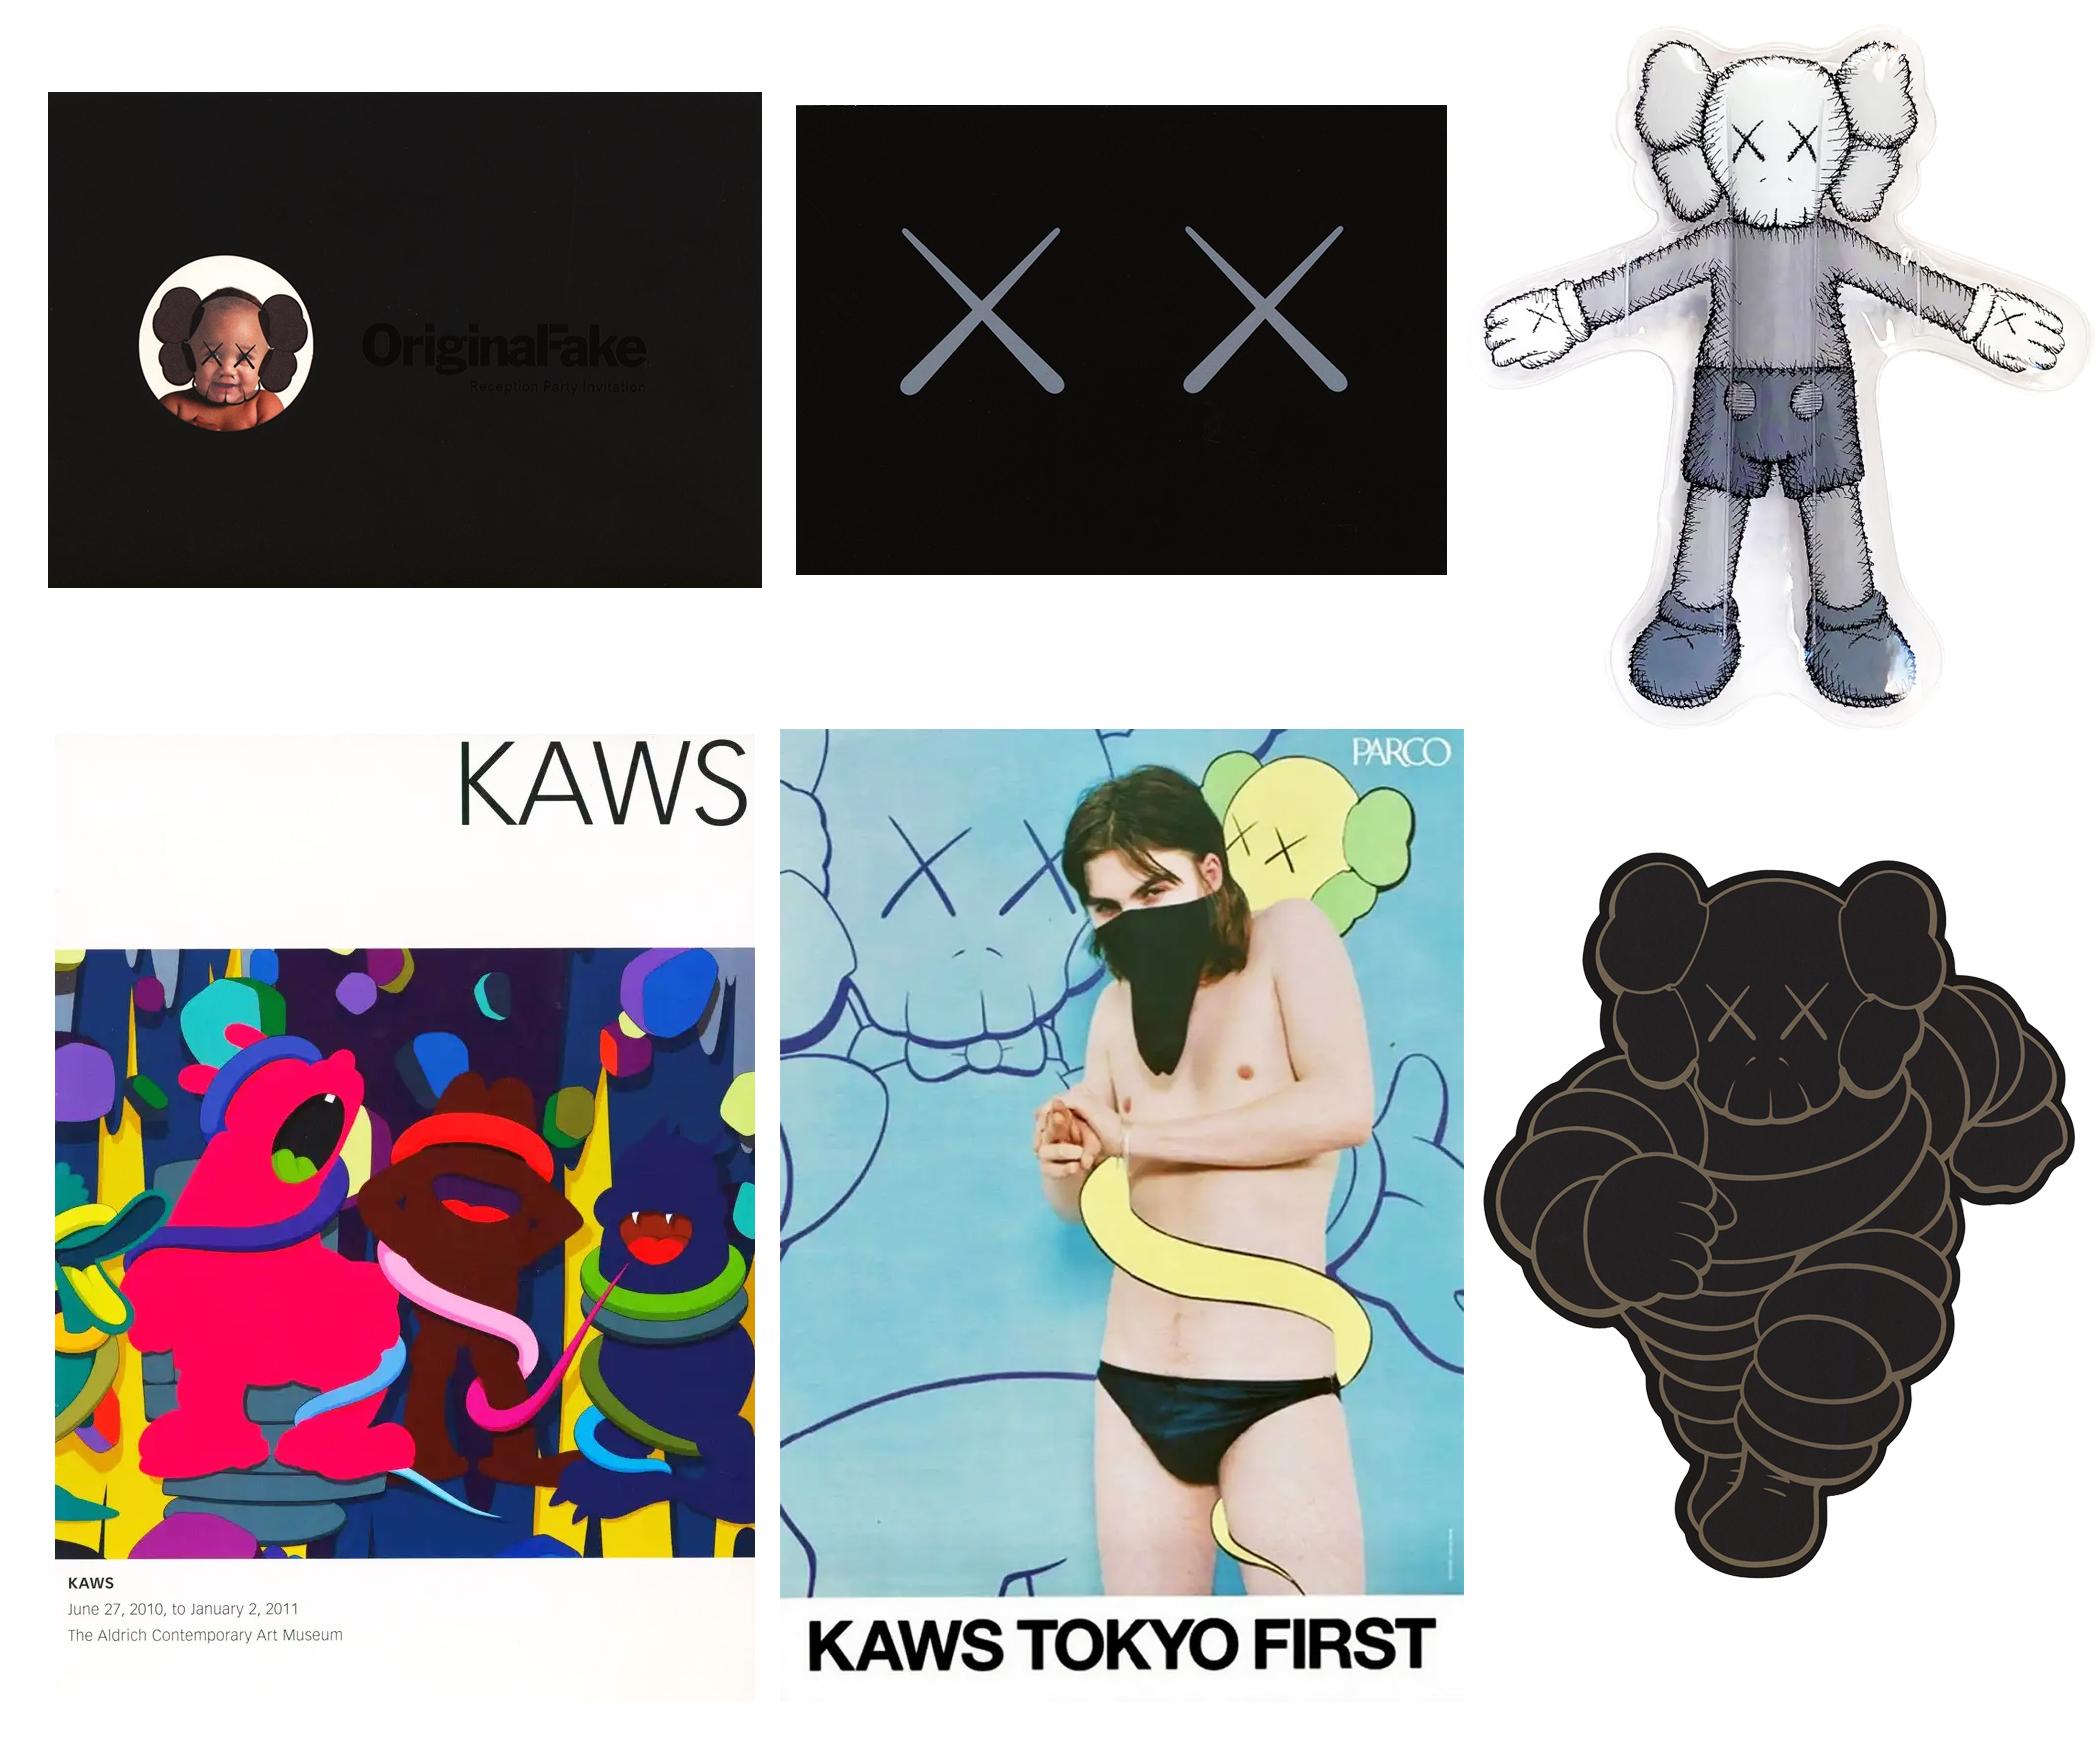 KAWS 2001-2019 collection of 6 gallery announcements 1